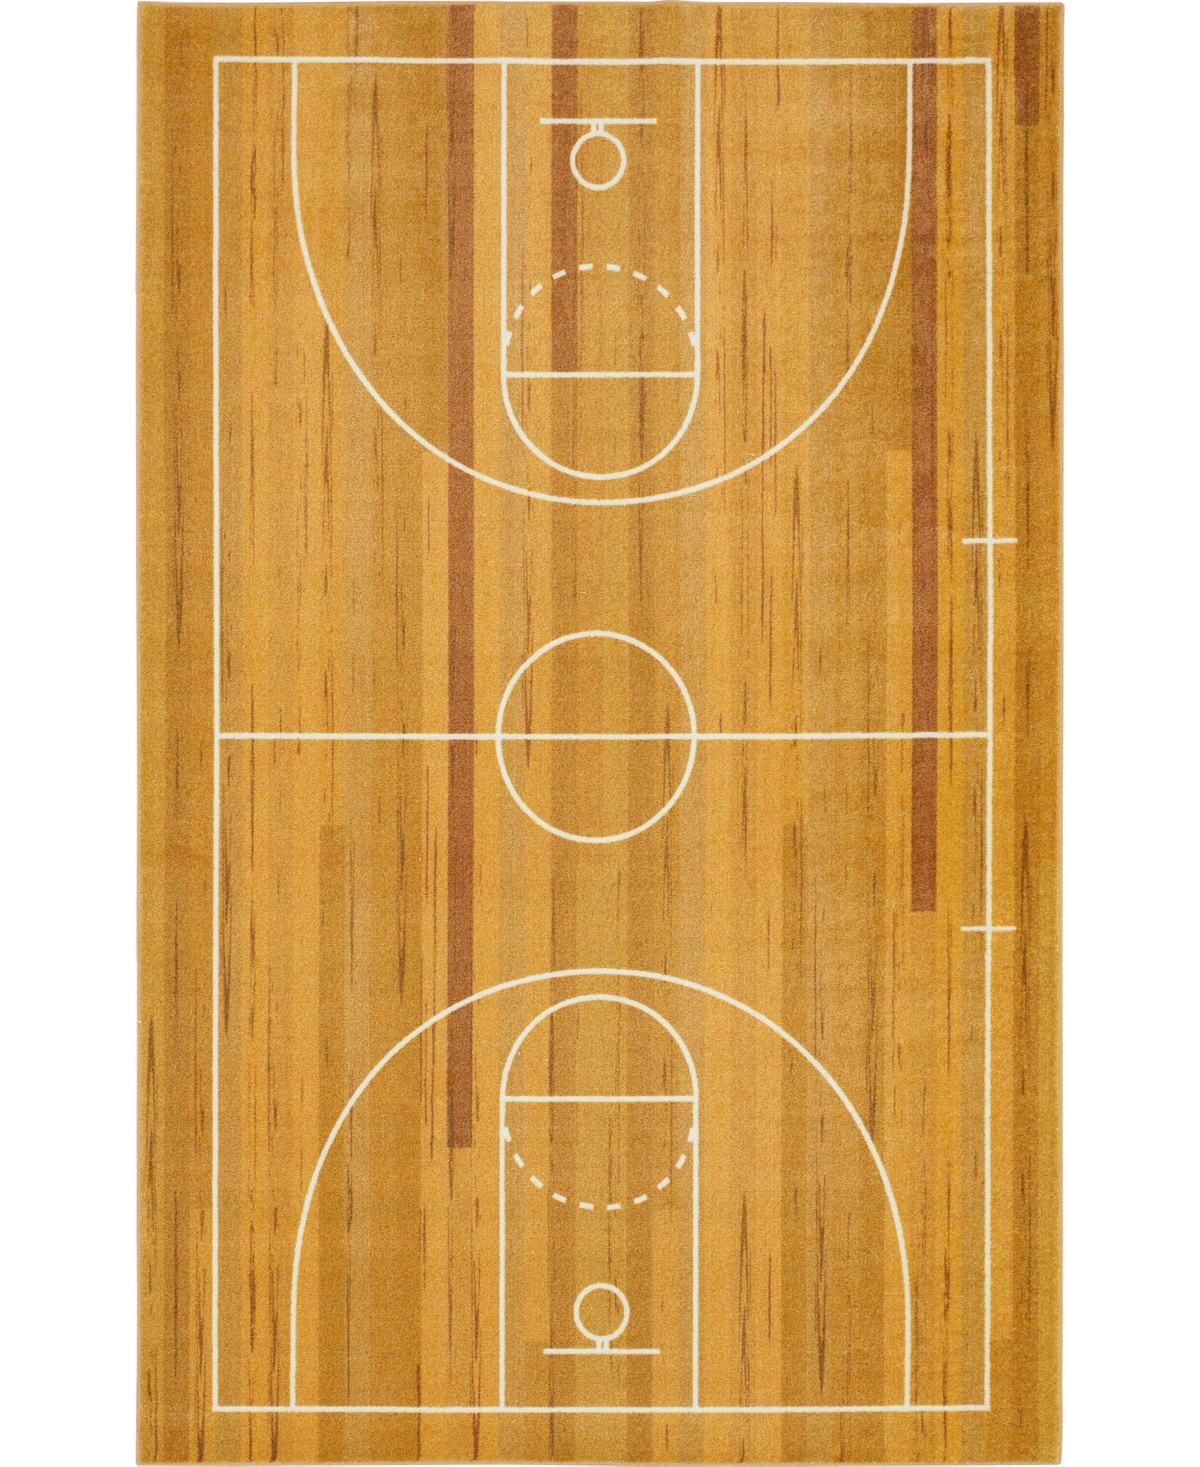 Mohawk Prismatic Basketball Court Kids Rug 5' X 8' Area Rug In Brown